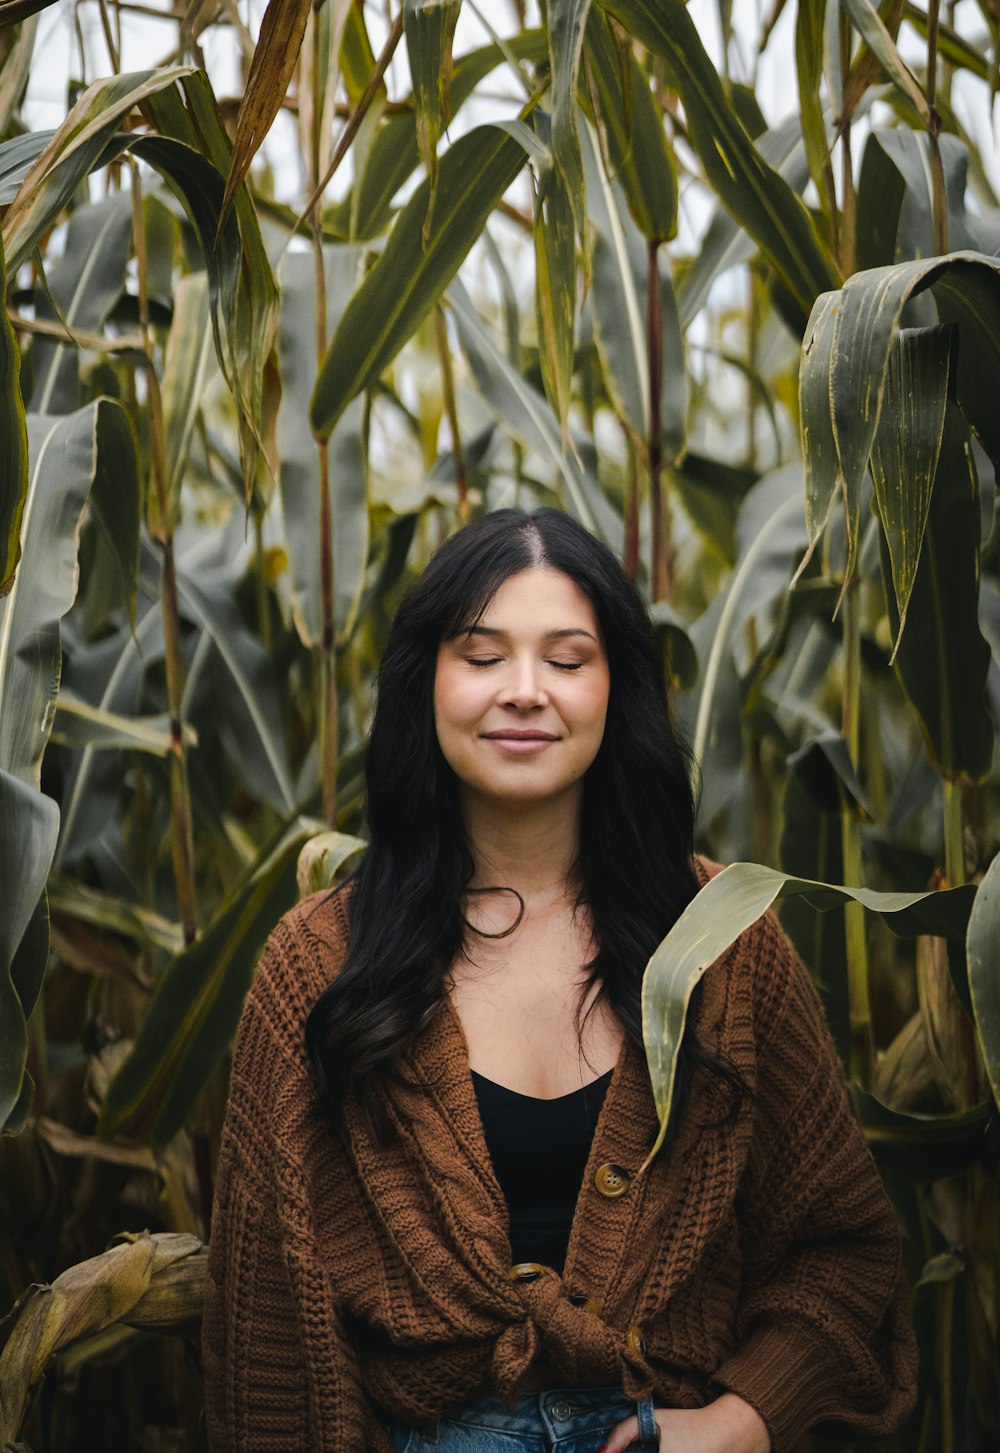 a woman standing in a corn field with her eyes closed